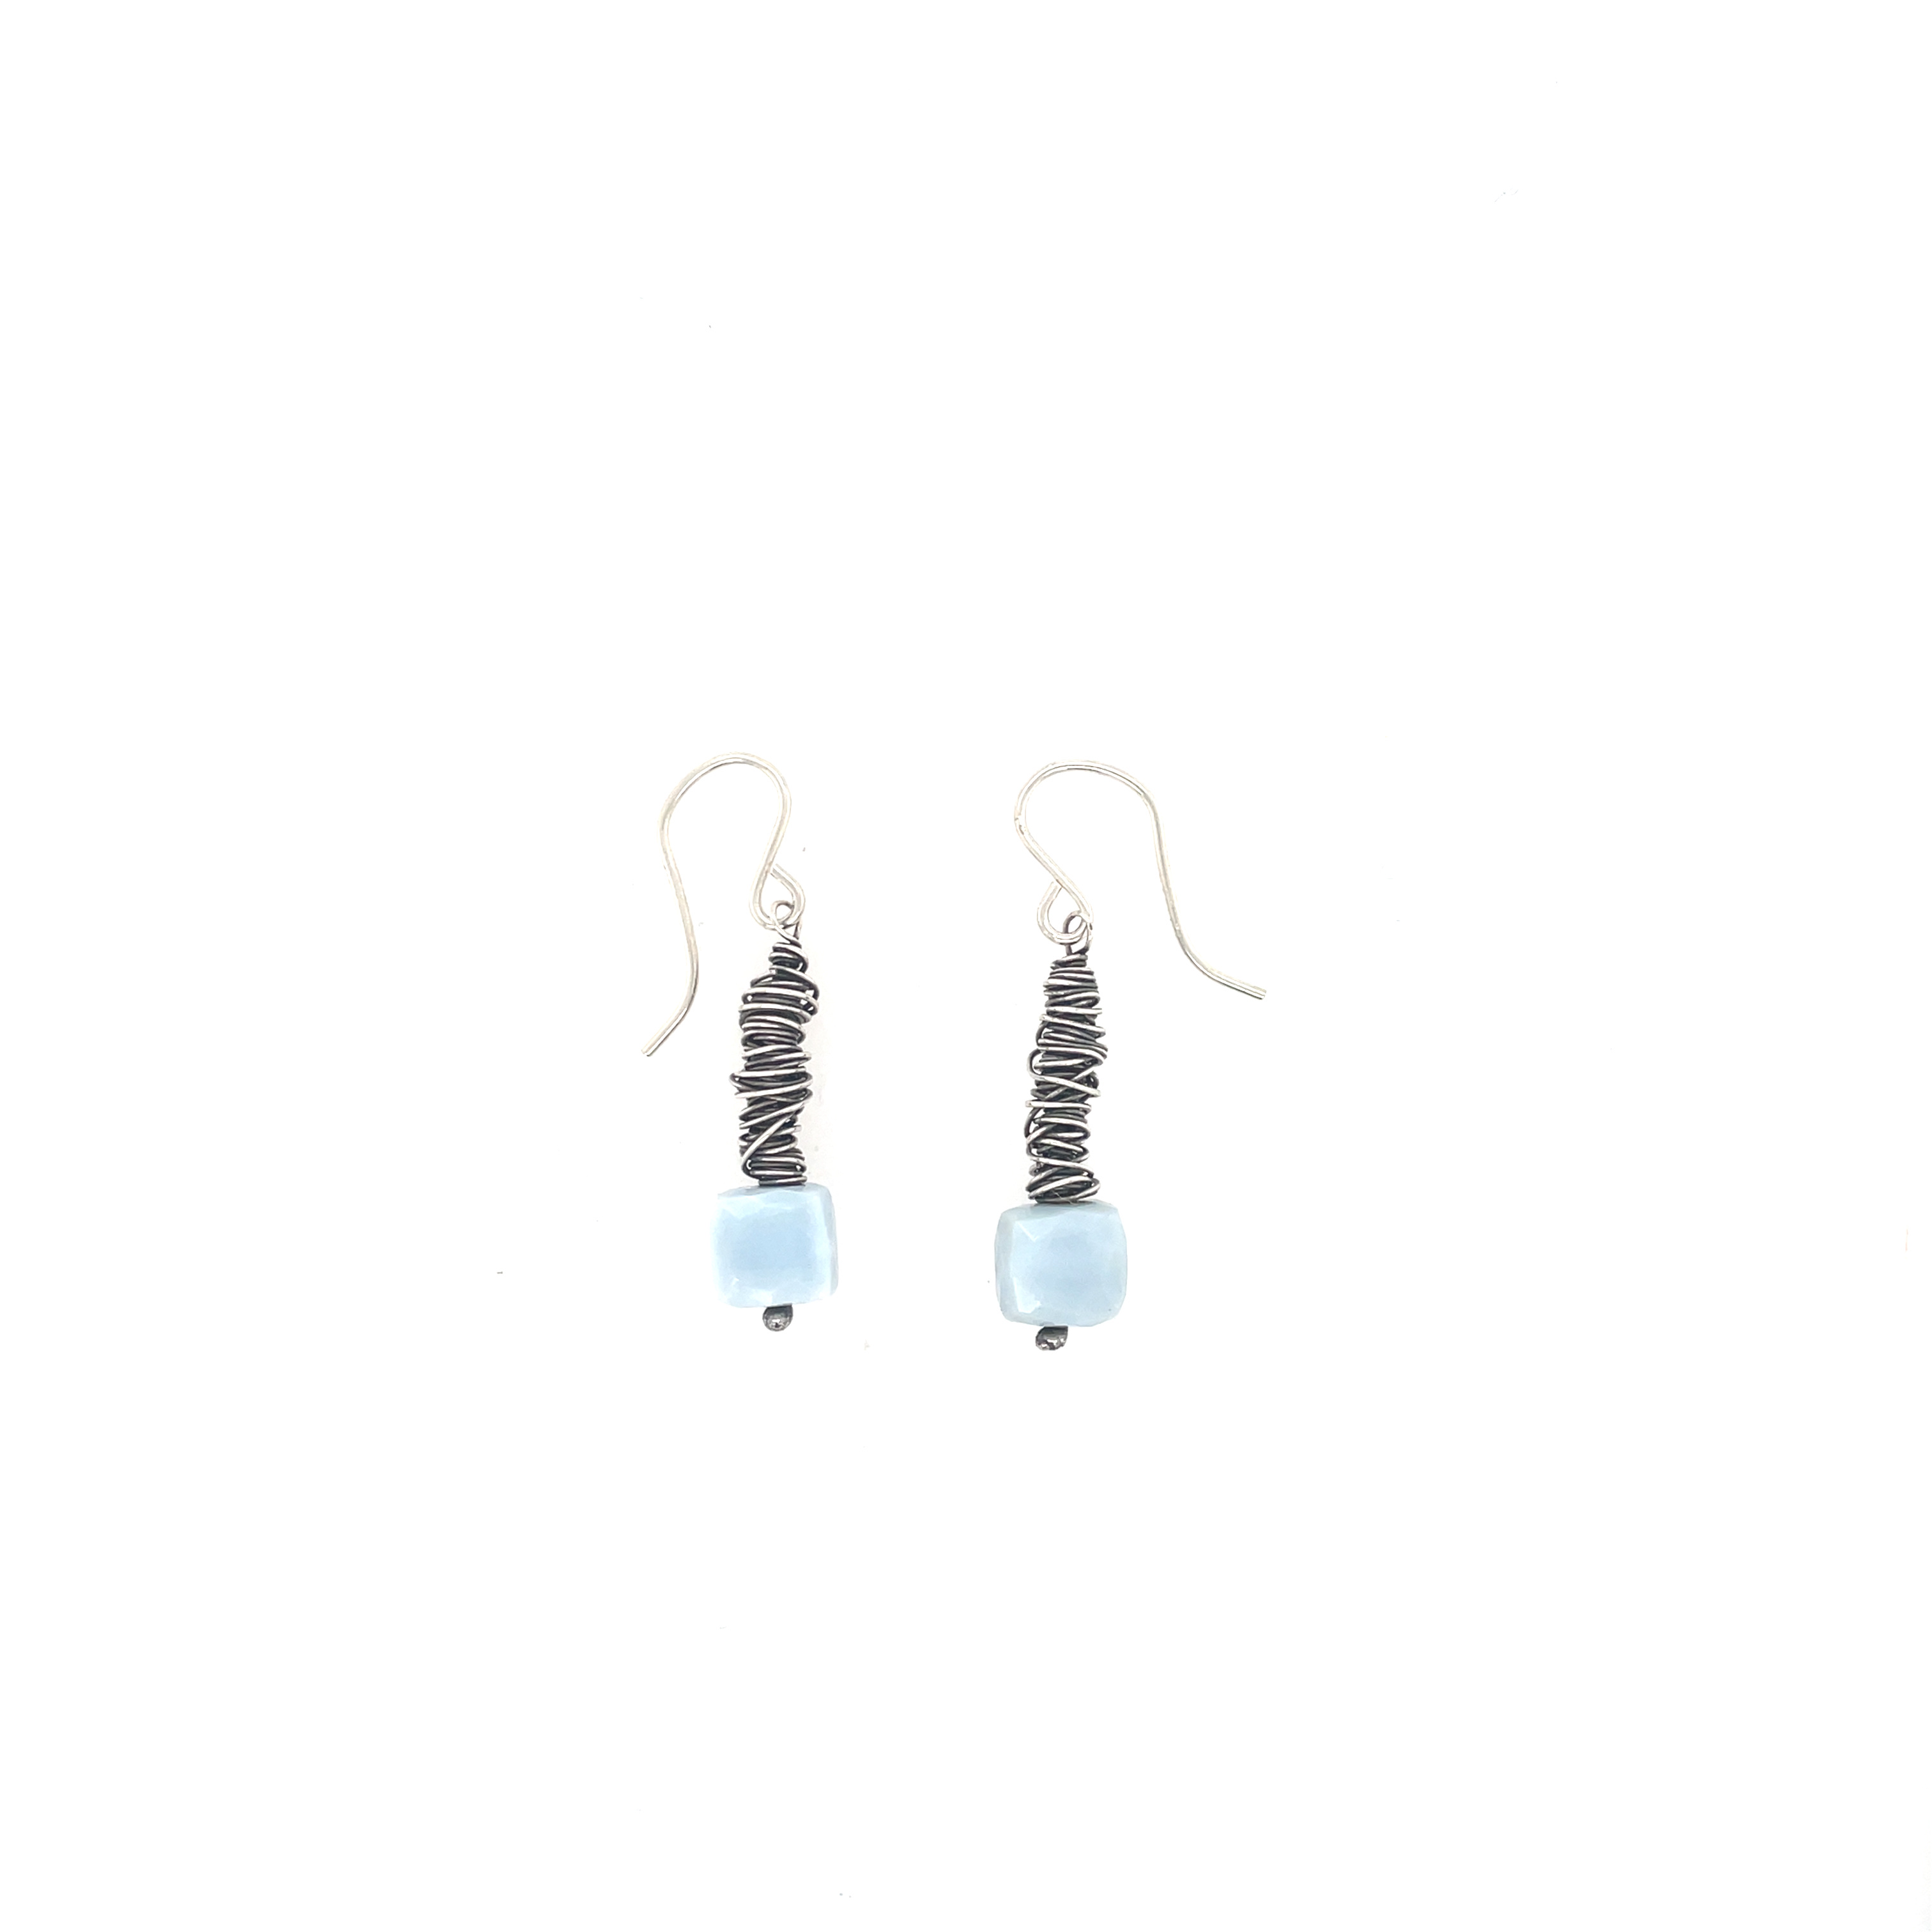 Lorimore and Oxidized Sterling Earrings